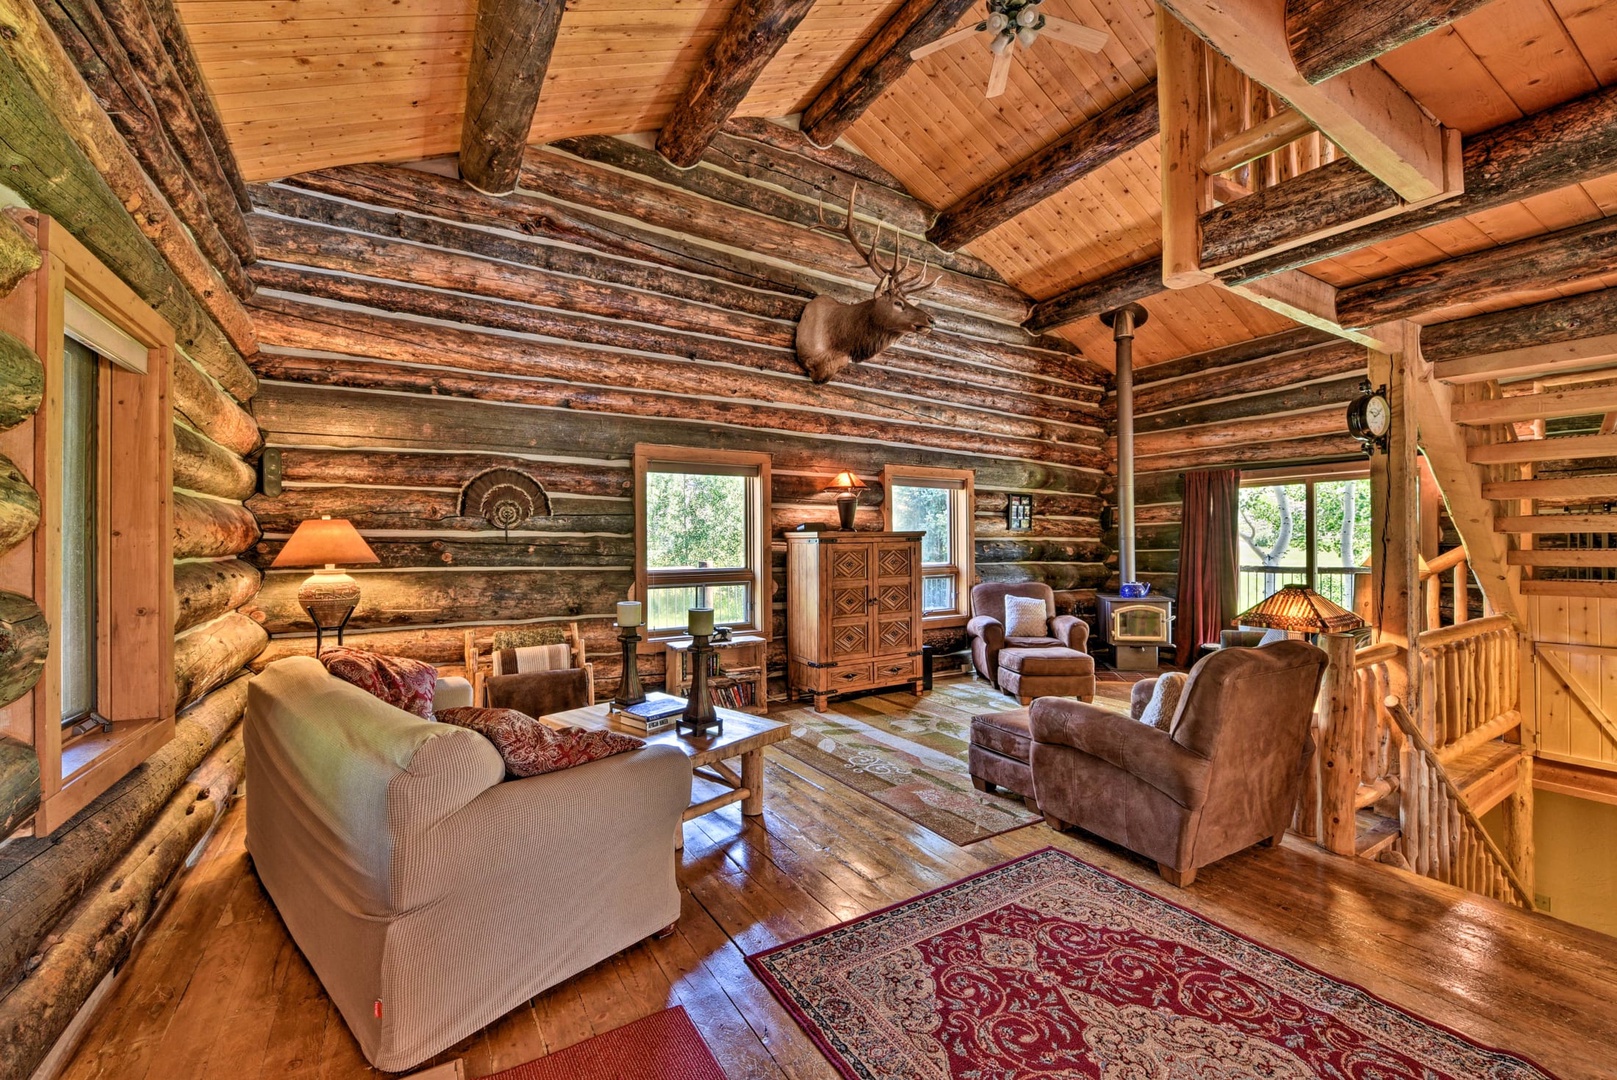 The Longhorn Horse Ranch Cabin w/ Hot Tub, Large Deck and Stunning Views!